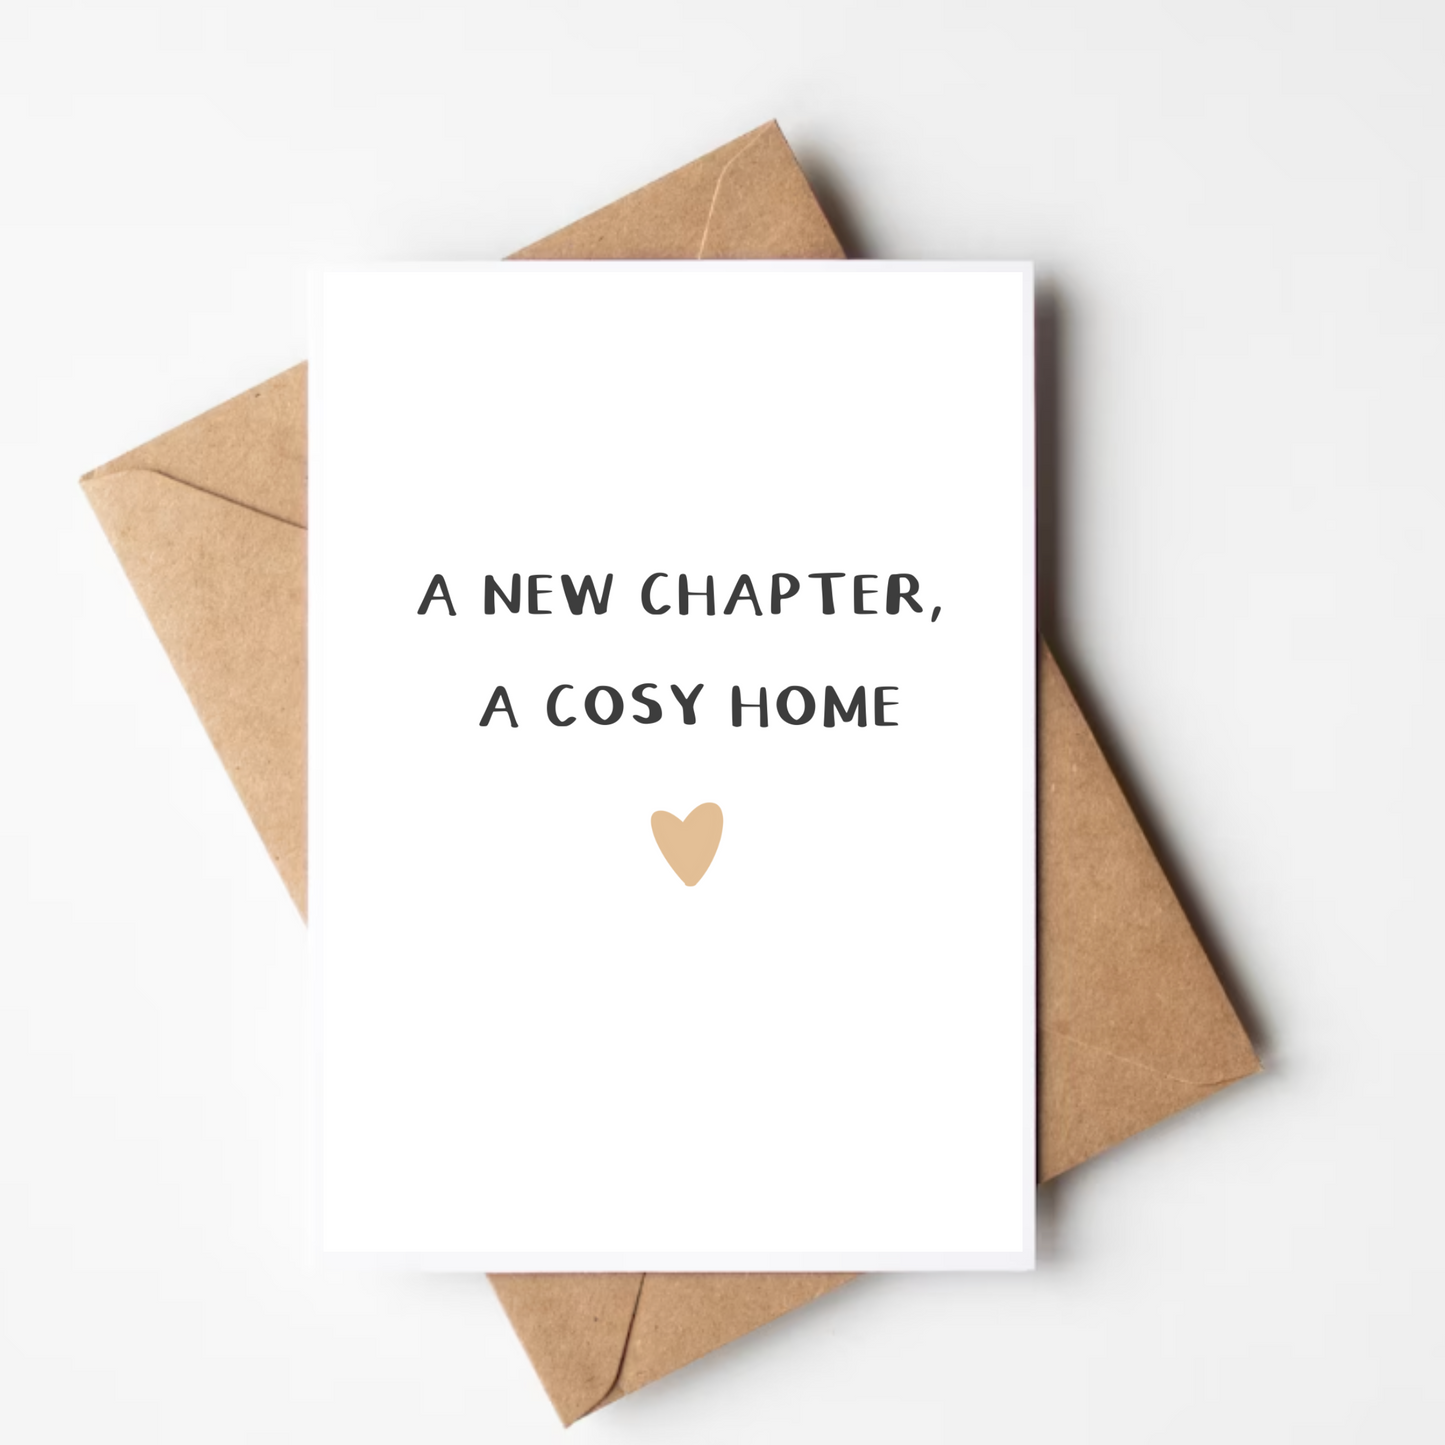 A New Chapter, A Cosy Home